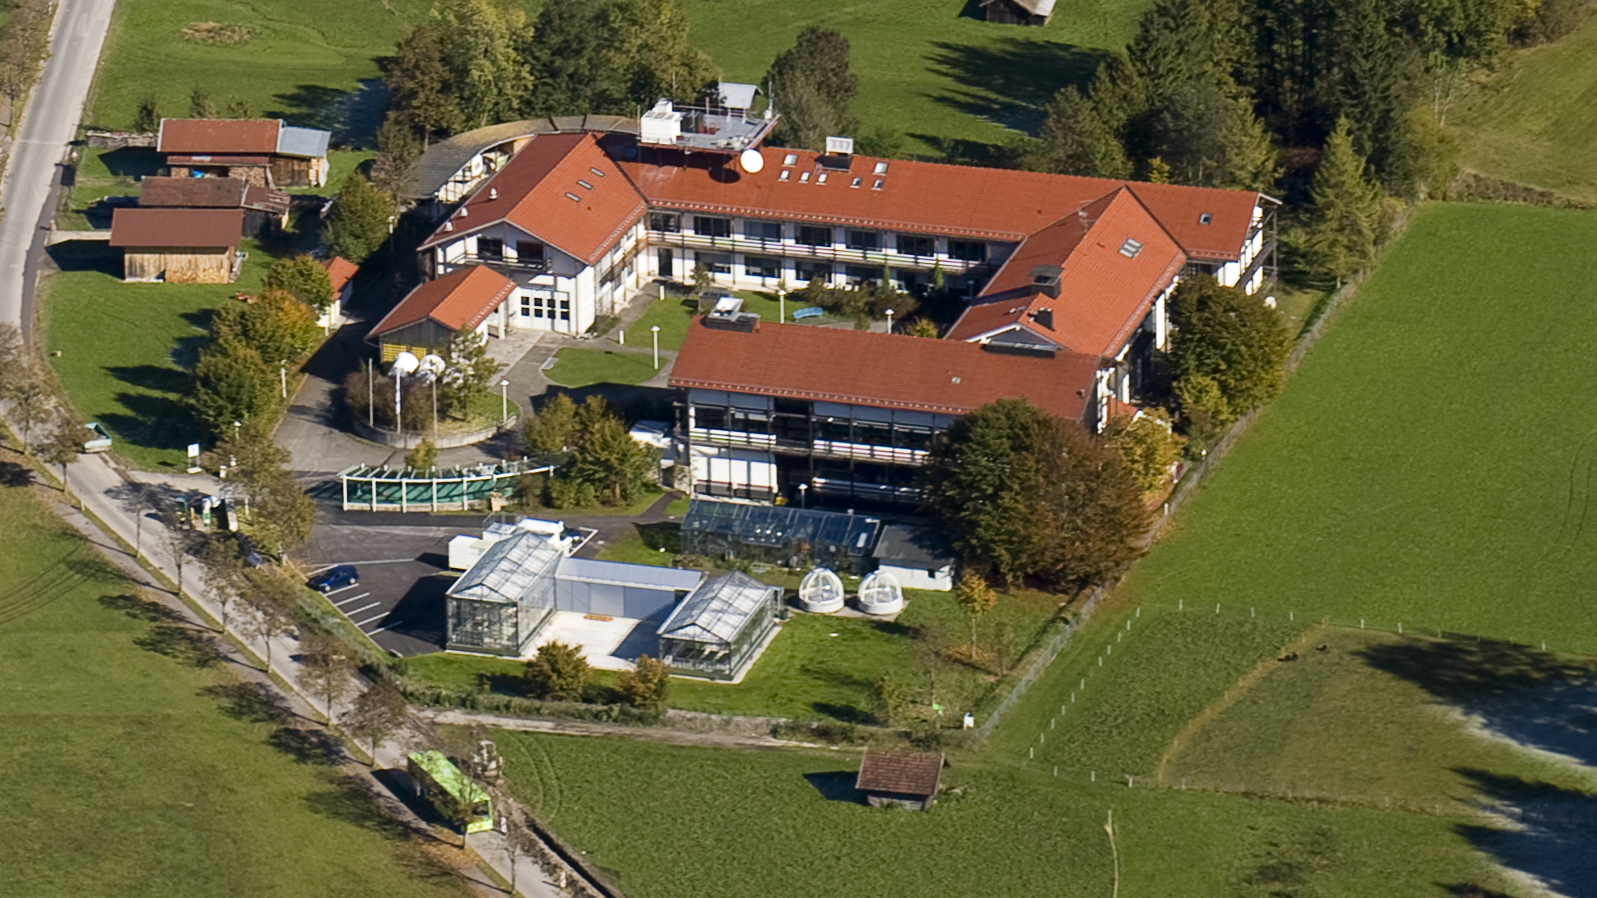 Aerial view of the institute of meteorology and climate research (imk-ifu) in Garmisch-Partenkirchen